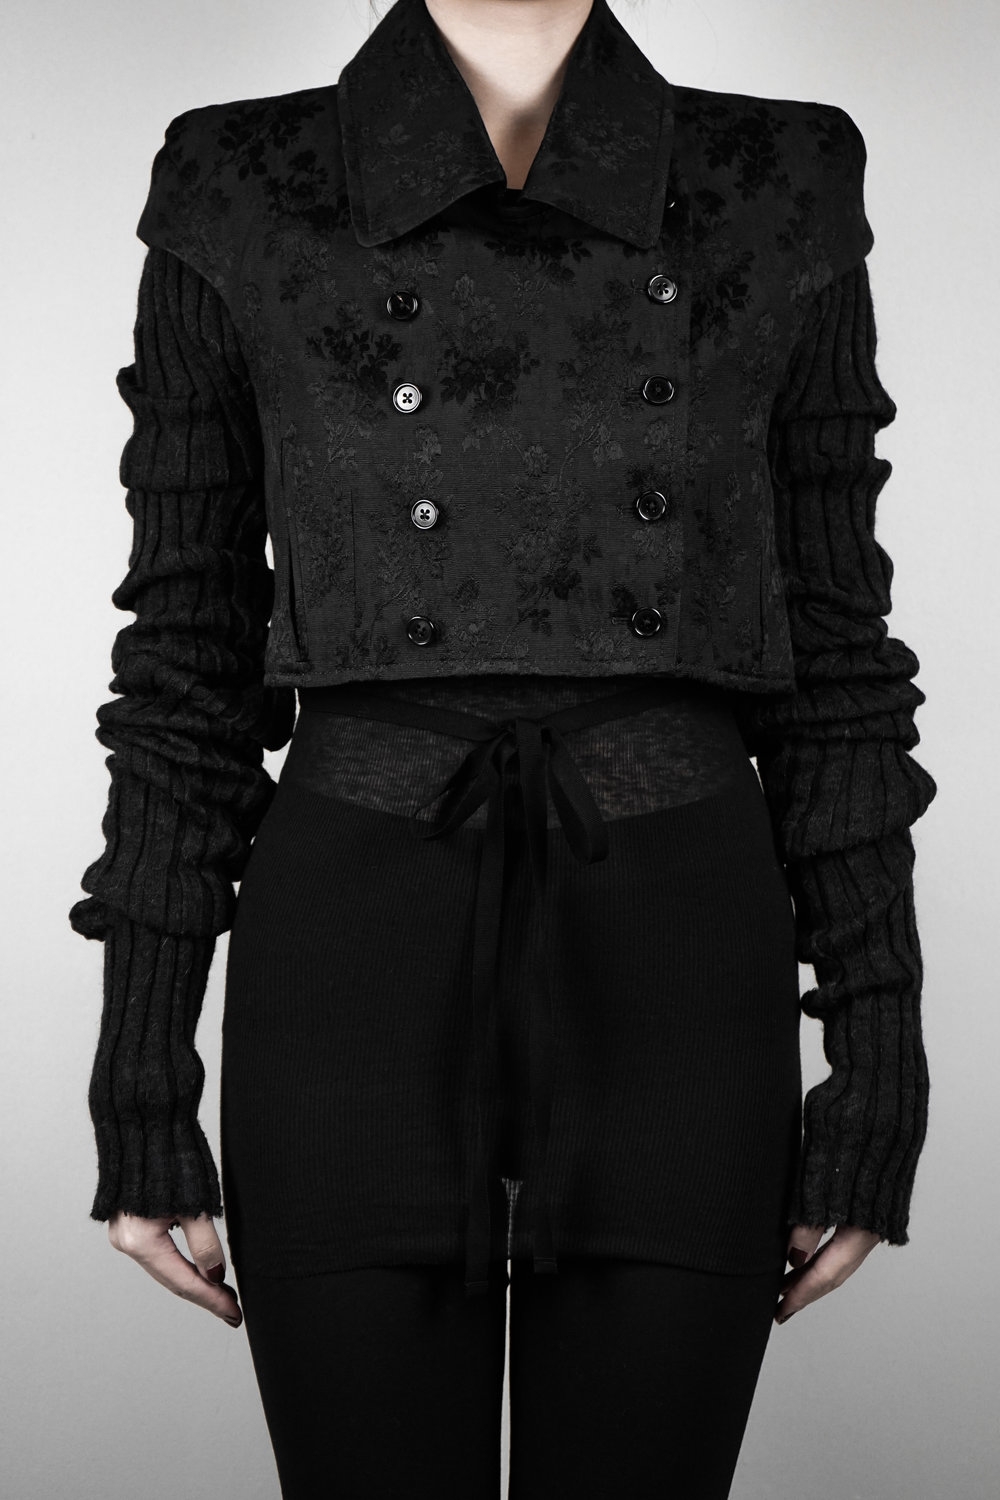 Ann Demeulemeester – Womens – Cropped Coat – Brocade – Black – Rayon / Mohair / Cotton – Double Breasted – Long Knitted Sleeves – Button Closing Front